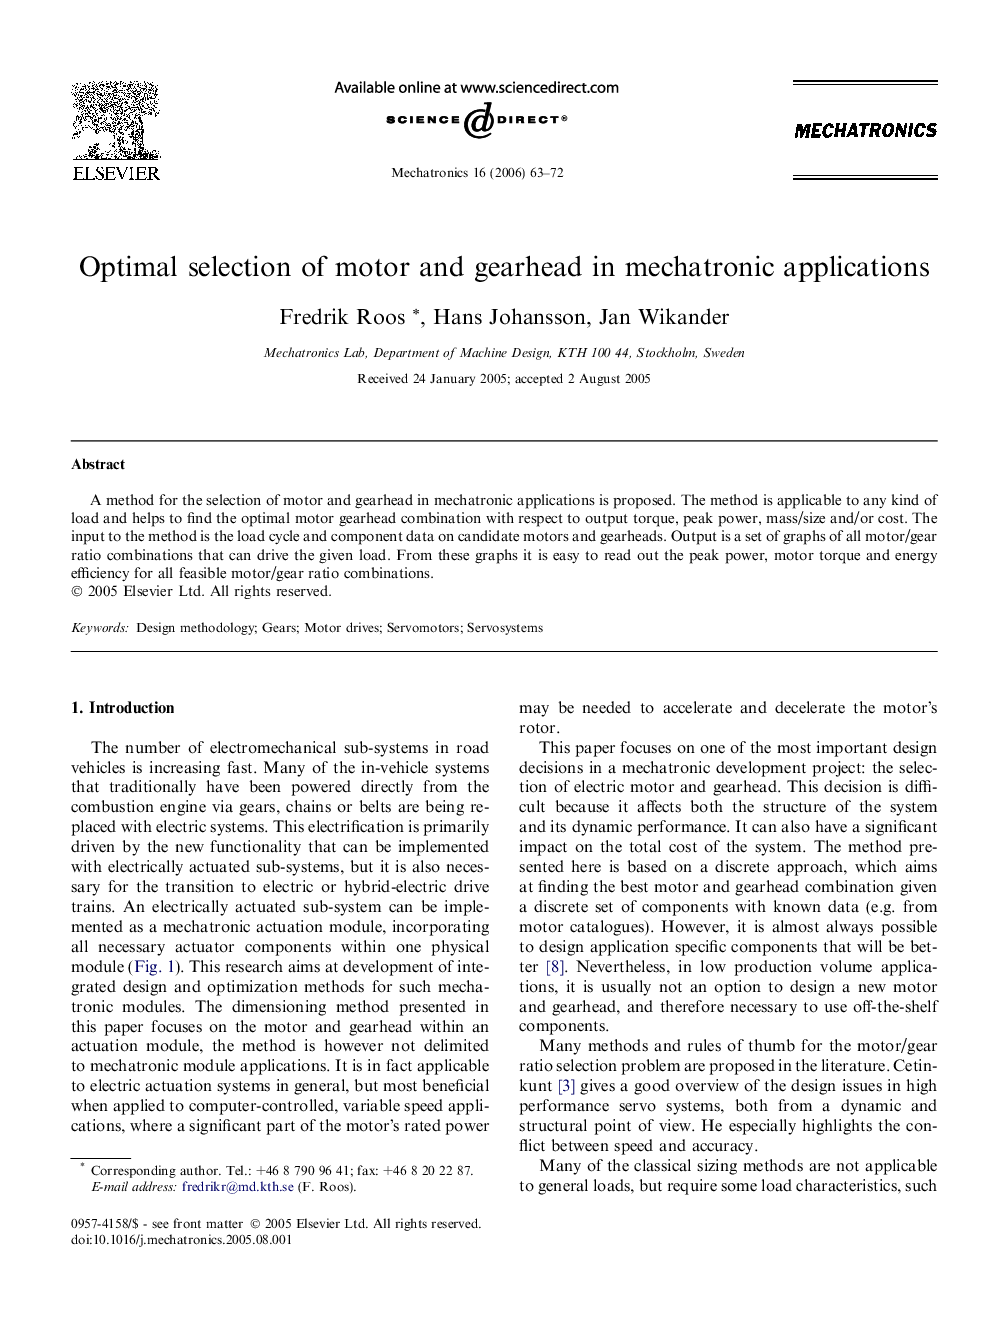 Optimal selection of motor and gearhead in mechatronic applications